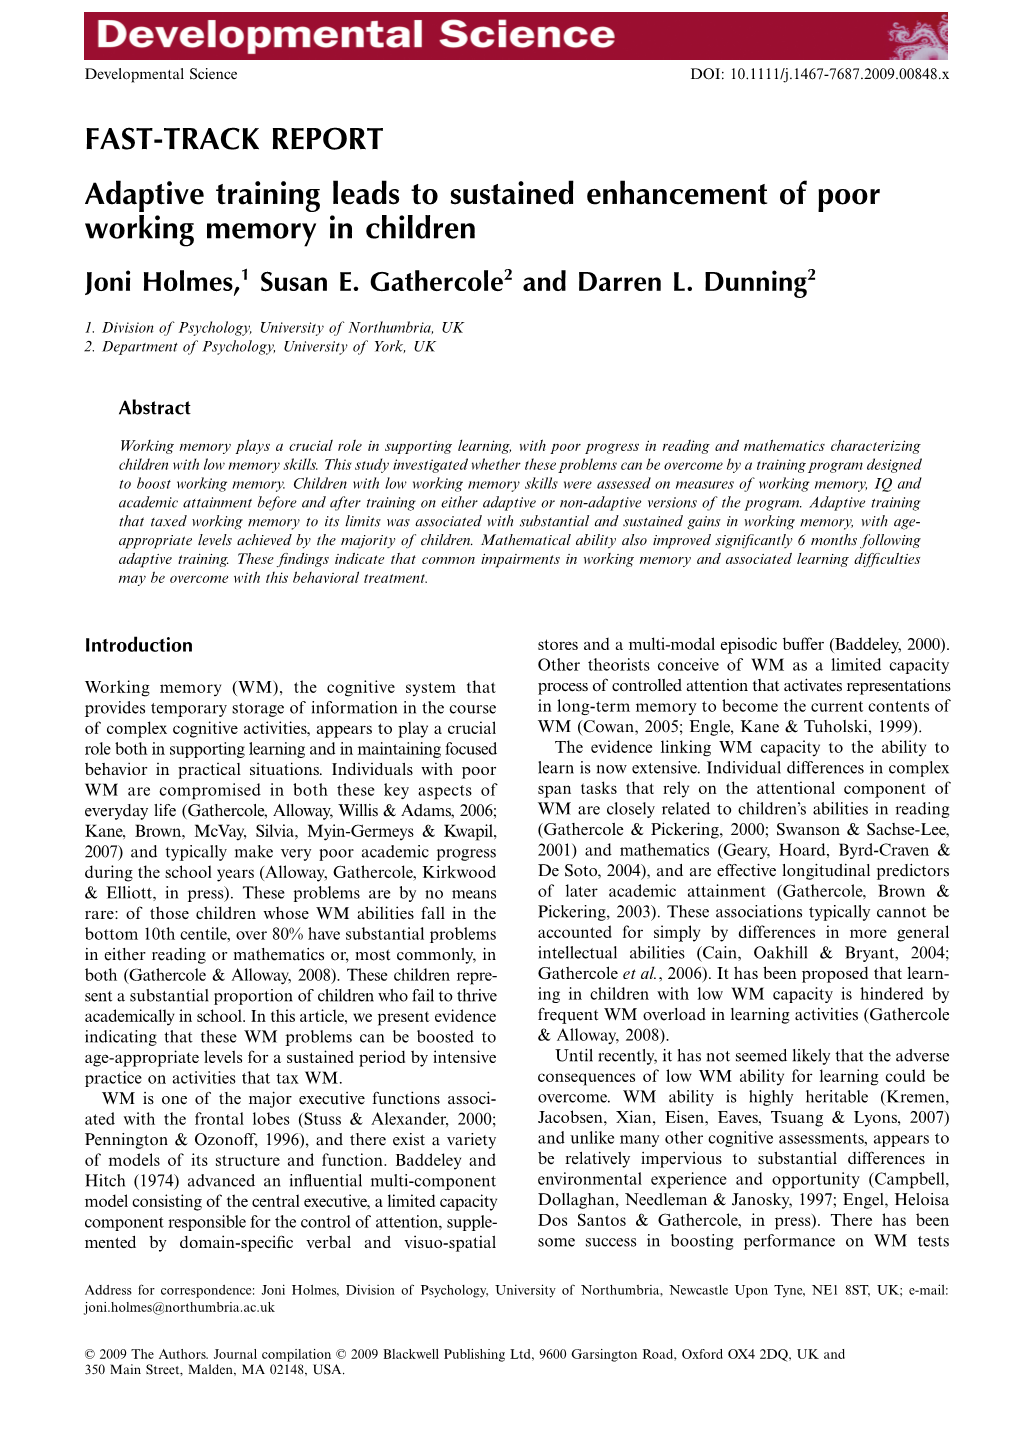 Adaptive Training Leads to Sustained Enhancement of Poor Working Memory in Children Joni Holmes,1 Susan E